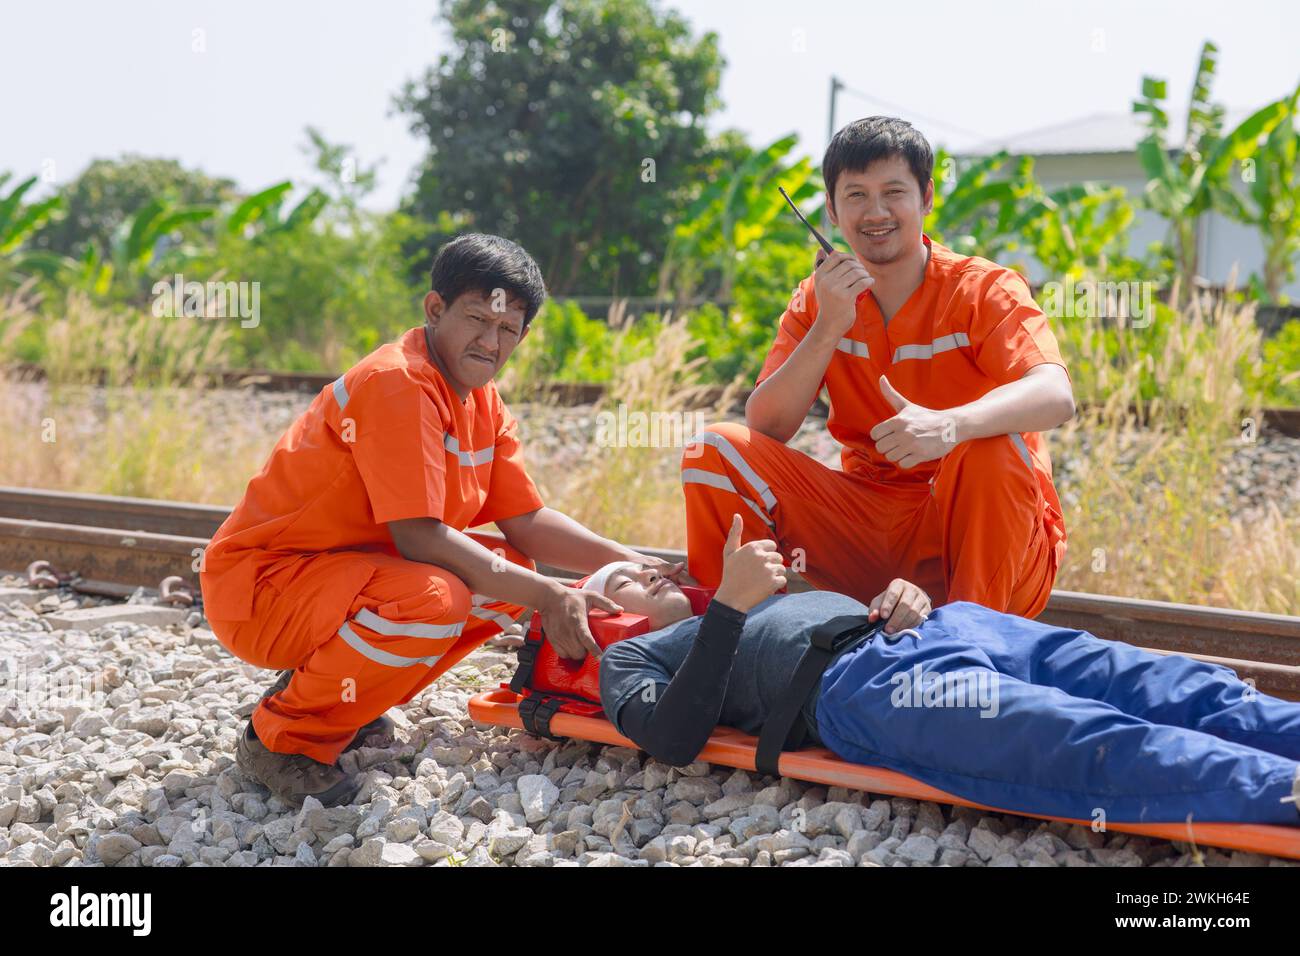 paramedic medical emergency doctor team working in action help first aid save people life at accident site outdoors Stock Photo